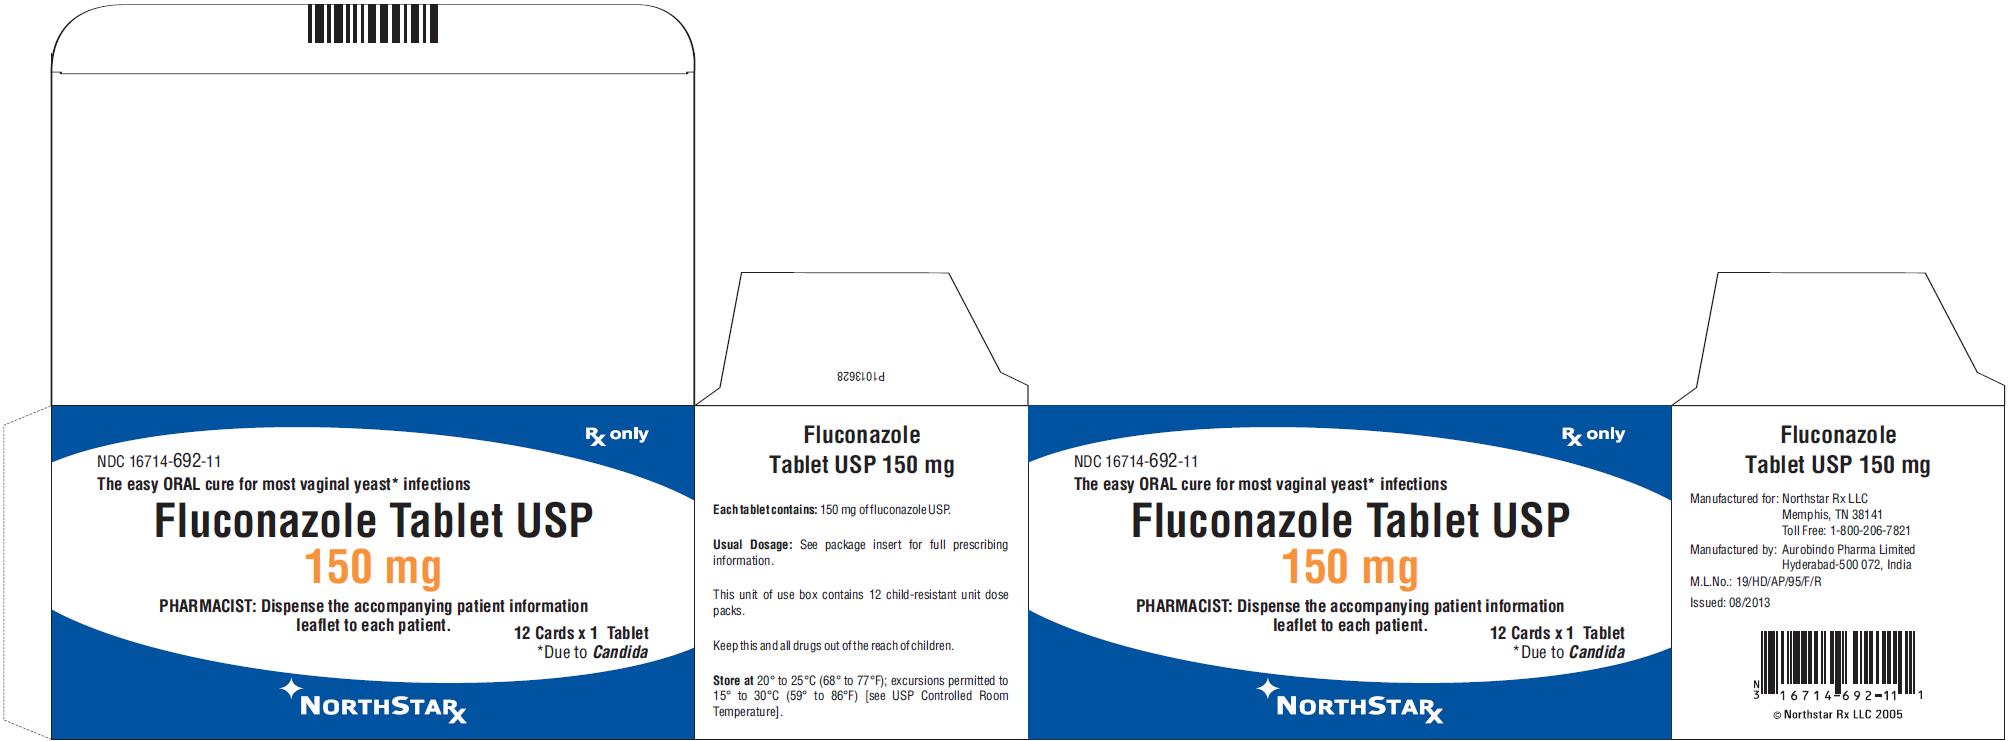 PACKAGE LABEL-PRINCIPAL DISPLAY PANEL - 150 mg Blister Carton (12 Cards x 1 Tablet)